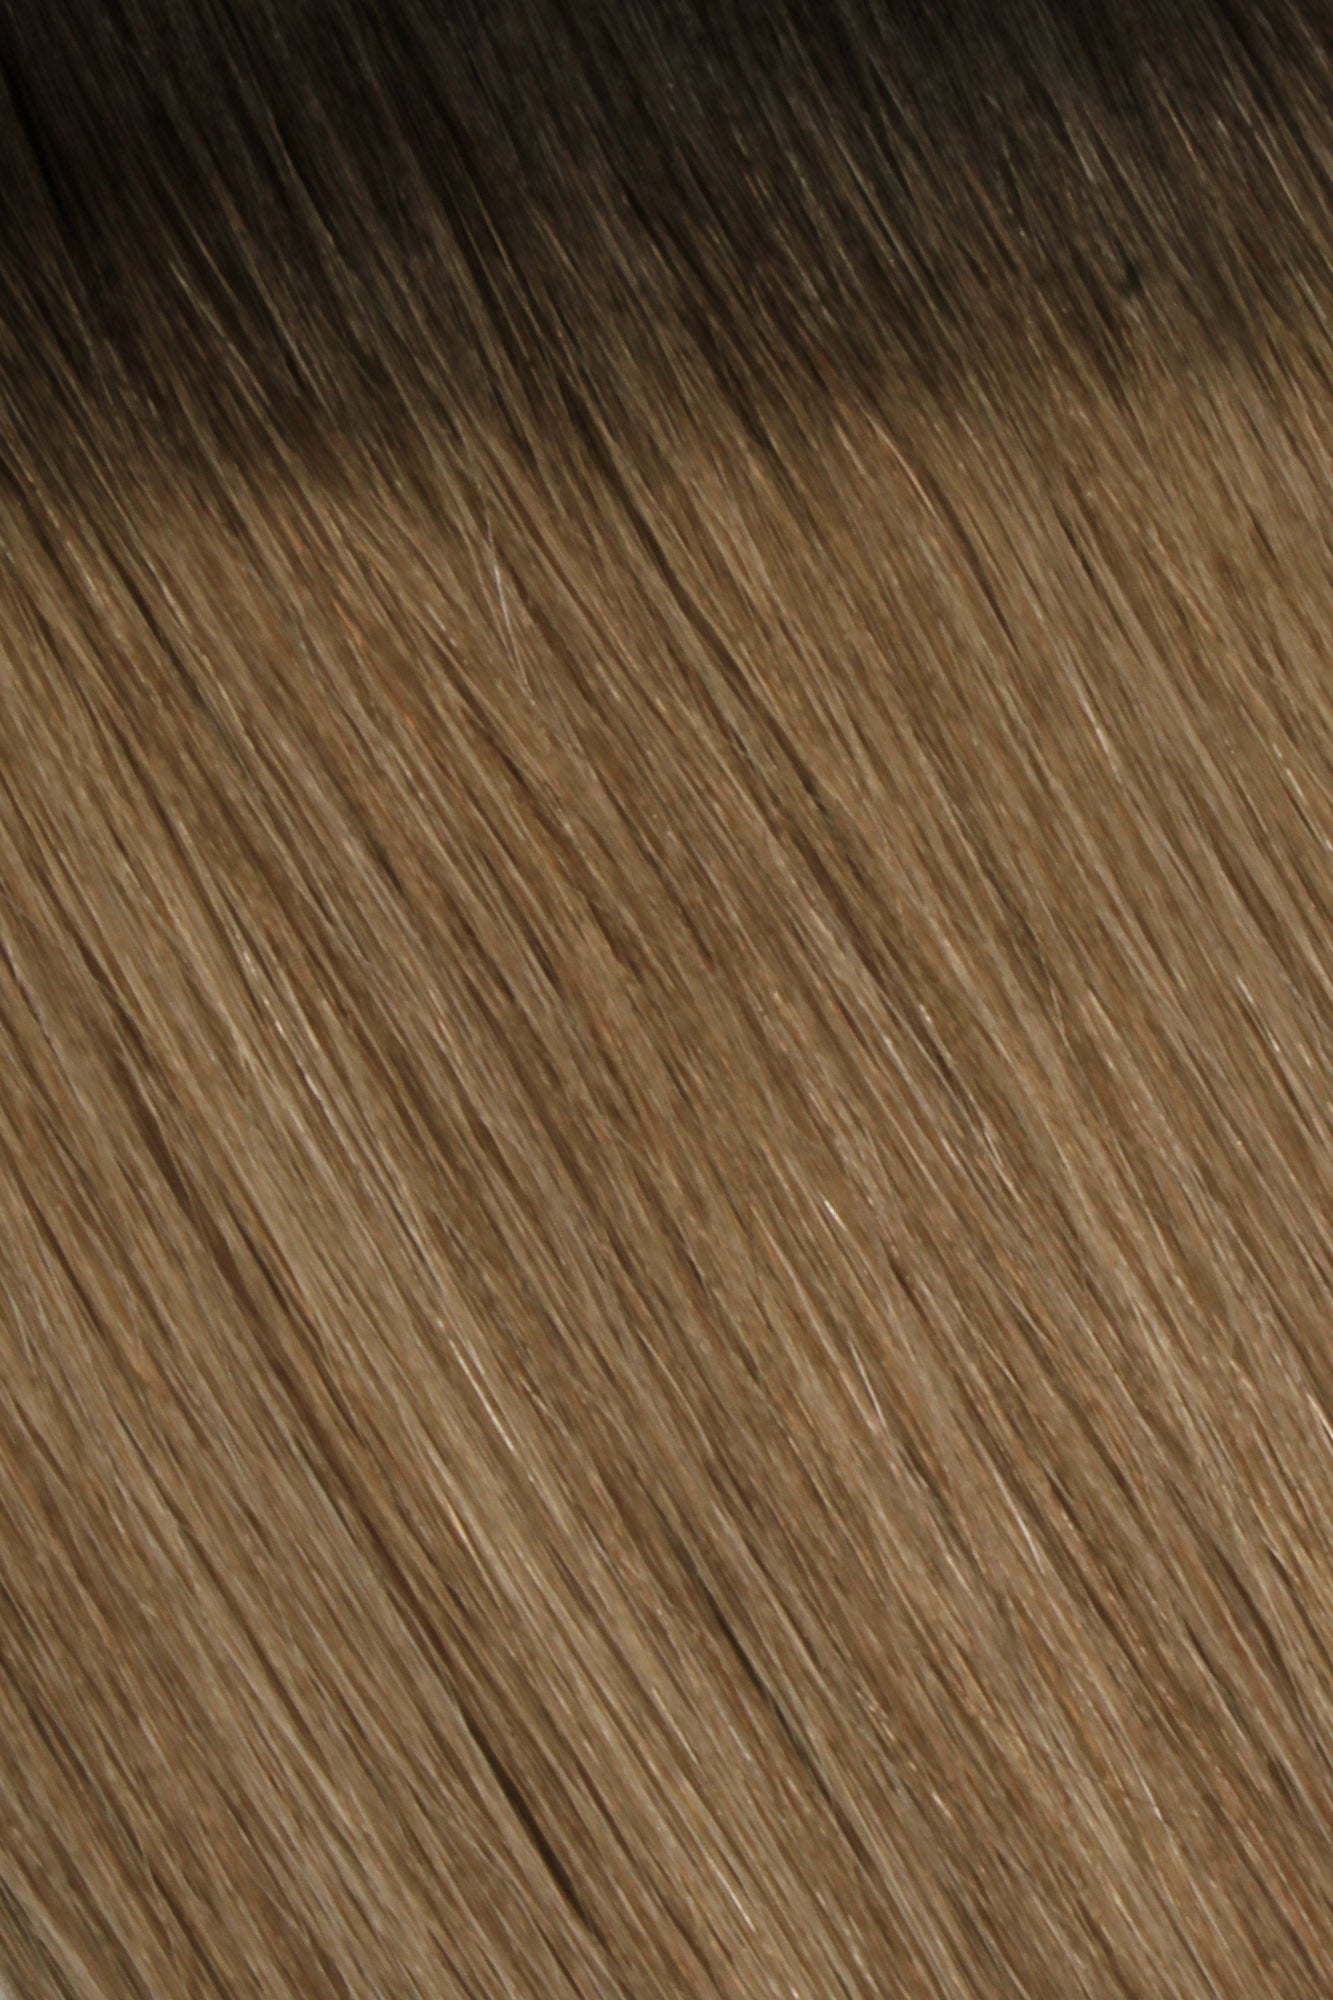 SEAMLESS® Flat Weft 24 Inches - SWAY Hair Extensions Natural SEAMLESS® Flat Weft 24 Inches extensions. Thin, flexible, and discreet. 100% Double Drawn Remy Human Hair. Versatile and reusable